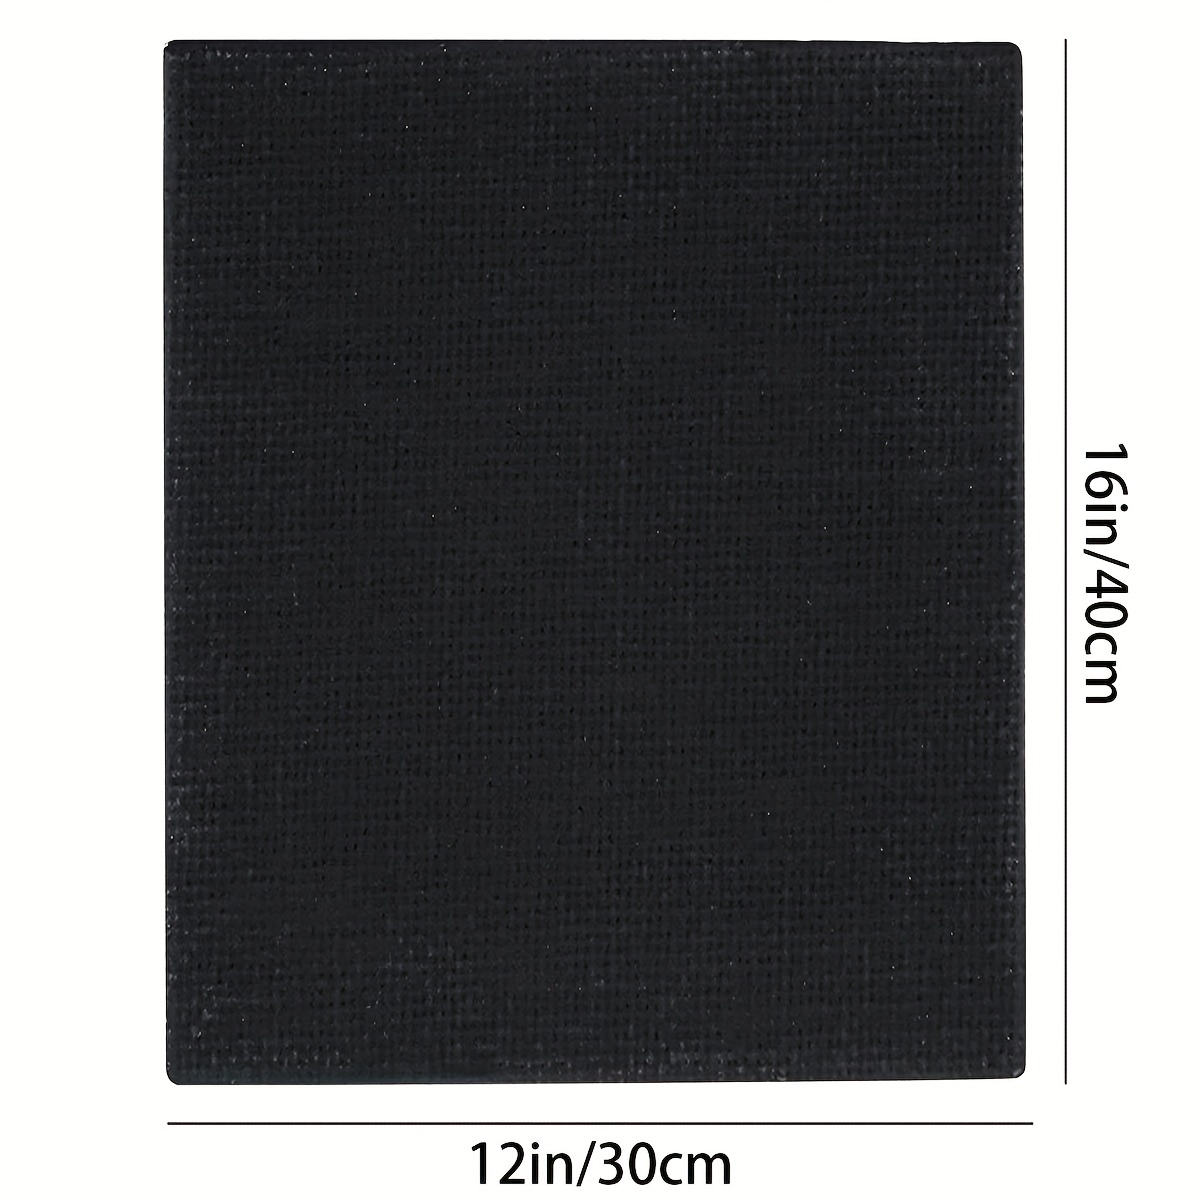  Ctosree 2 Pack Stretched Canvas for Painting, Large Black  Cotton Art Large Canvas Triple Primed Painting Canvas Profile Blank  Canvases for Watercolor Acrylics Oil Painting(36 x 48 Inch)